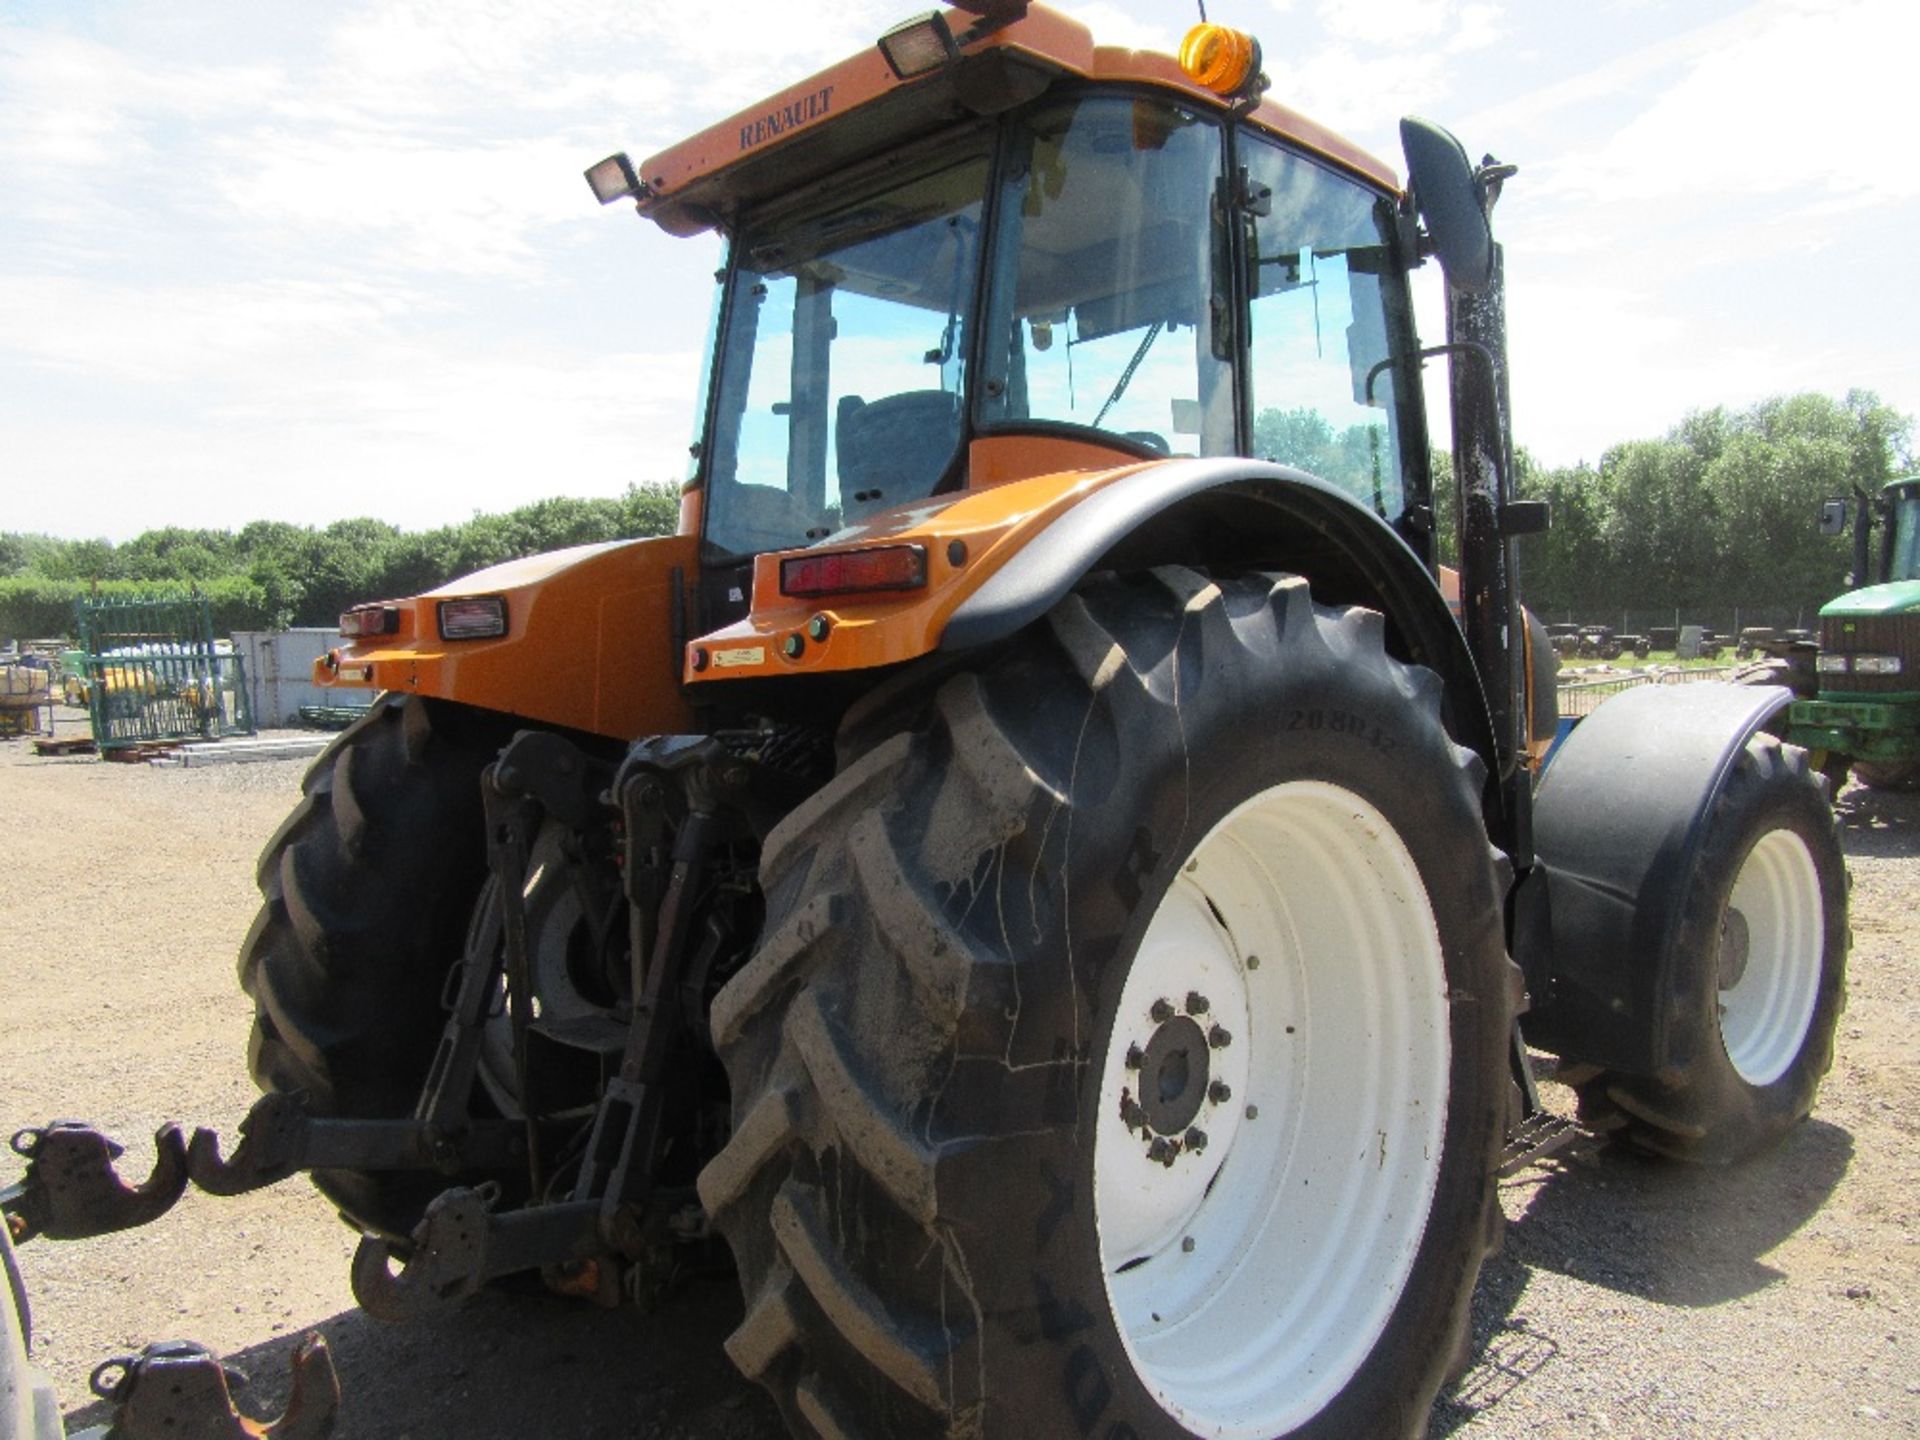 2001 Renault Ares 825 4wd Tractor. V5 will be supplied. Reg No AY51 FKU Ser No 4320378 - Image 5 of 14